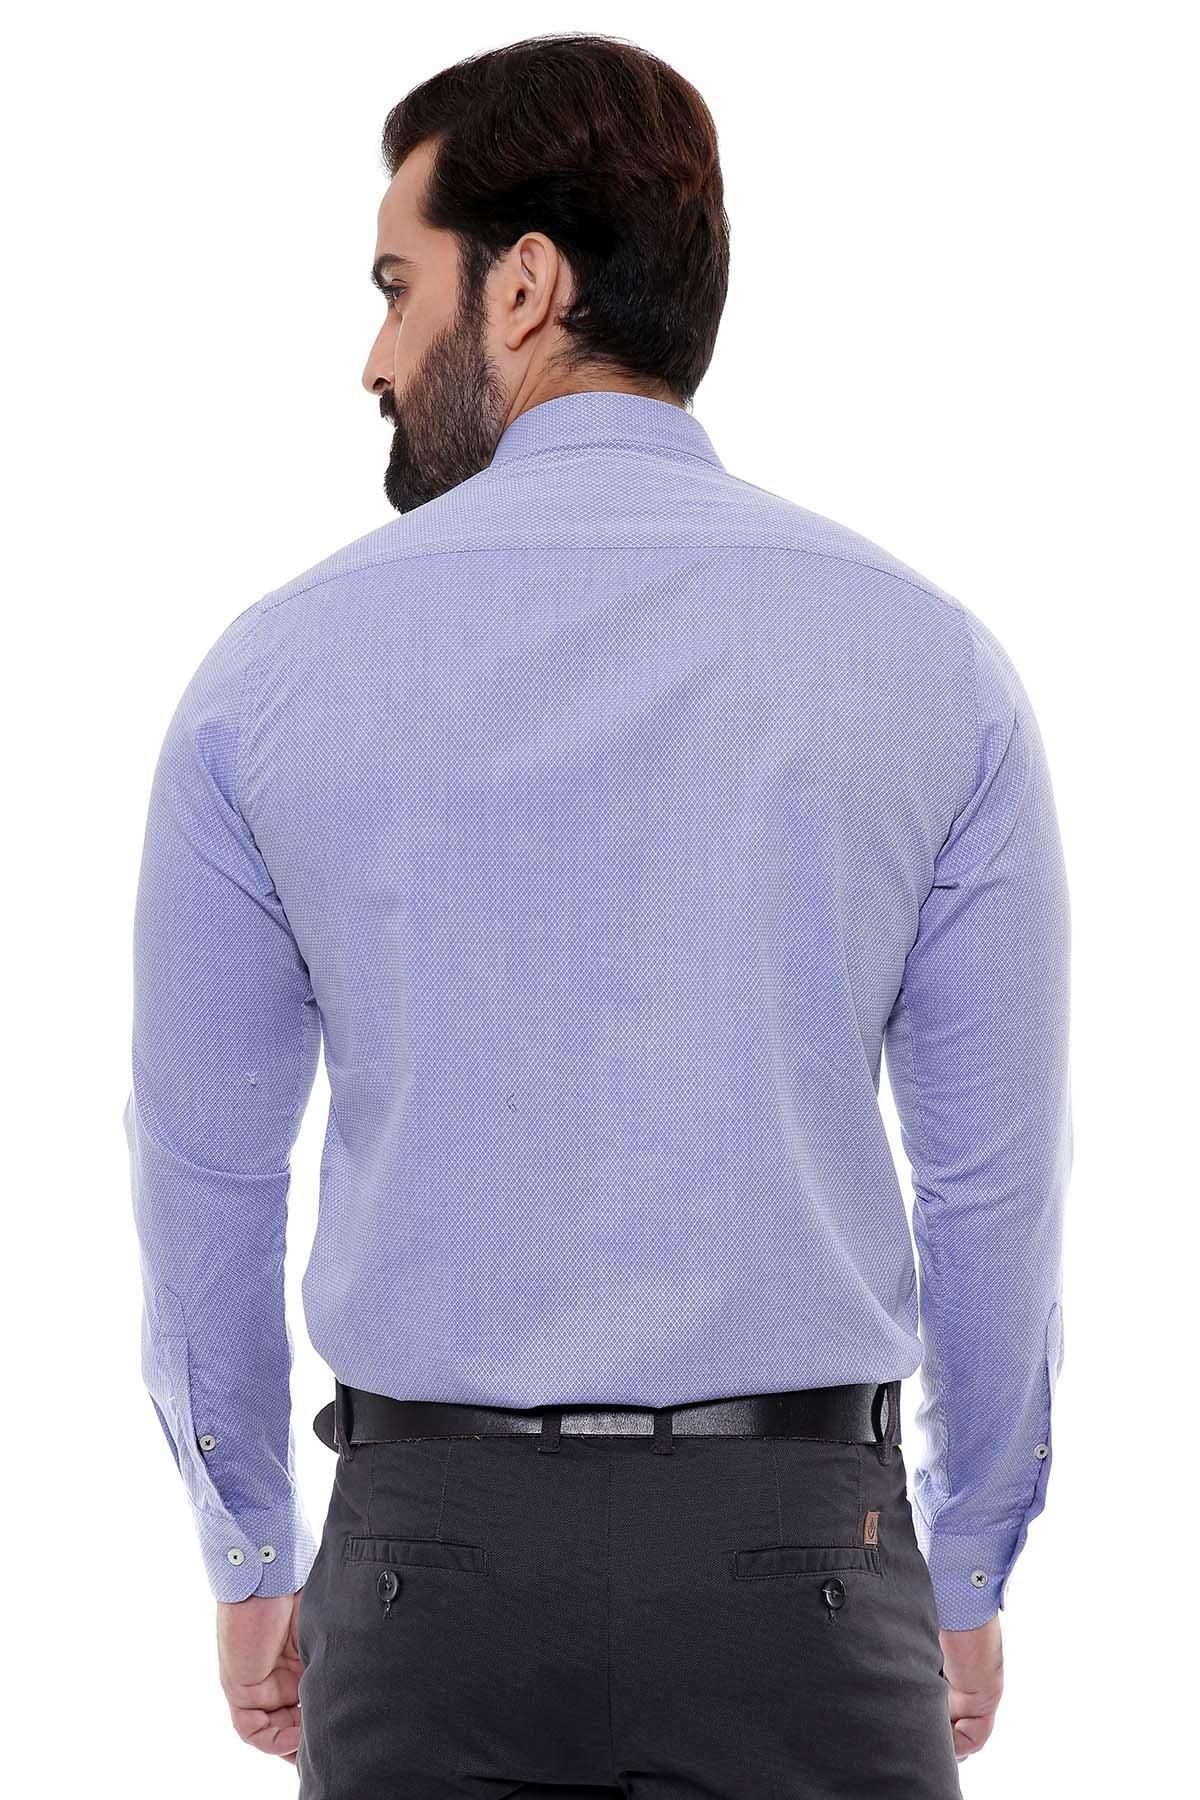 SMART SHIRTS BUTTON DOWN FULL SLEEVE SKY BLUE at Charcoal Clothing